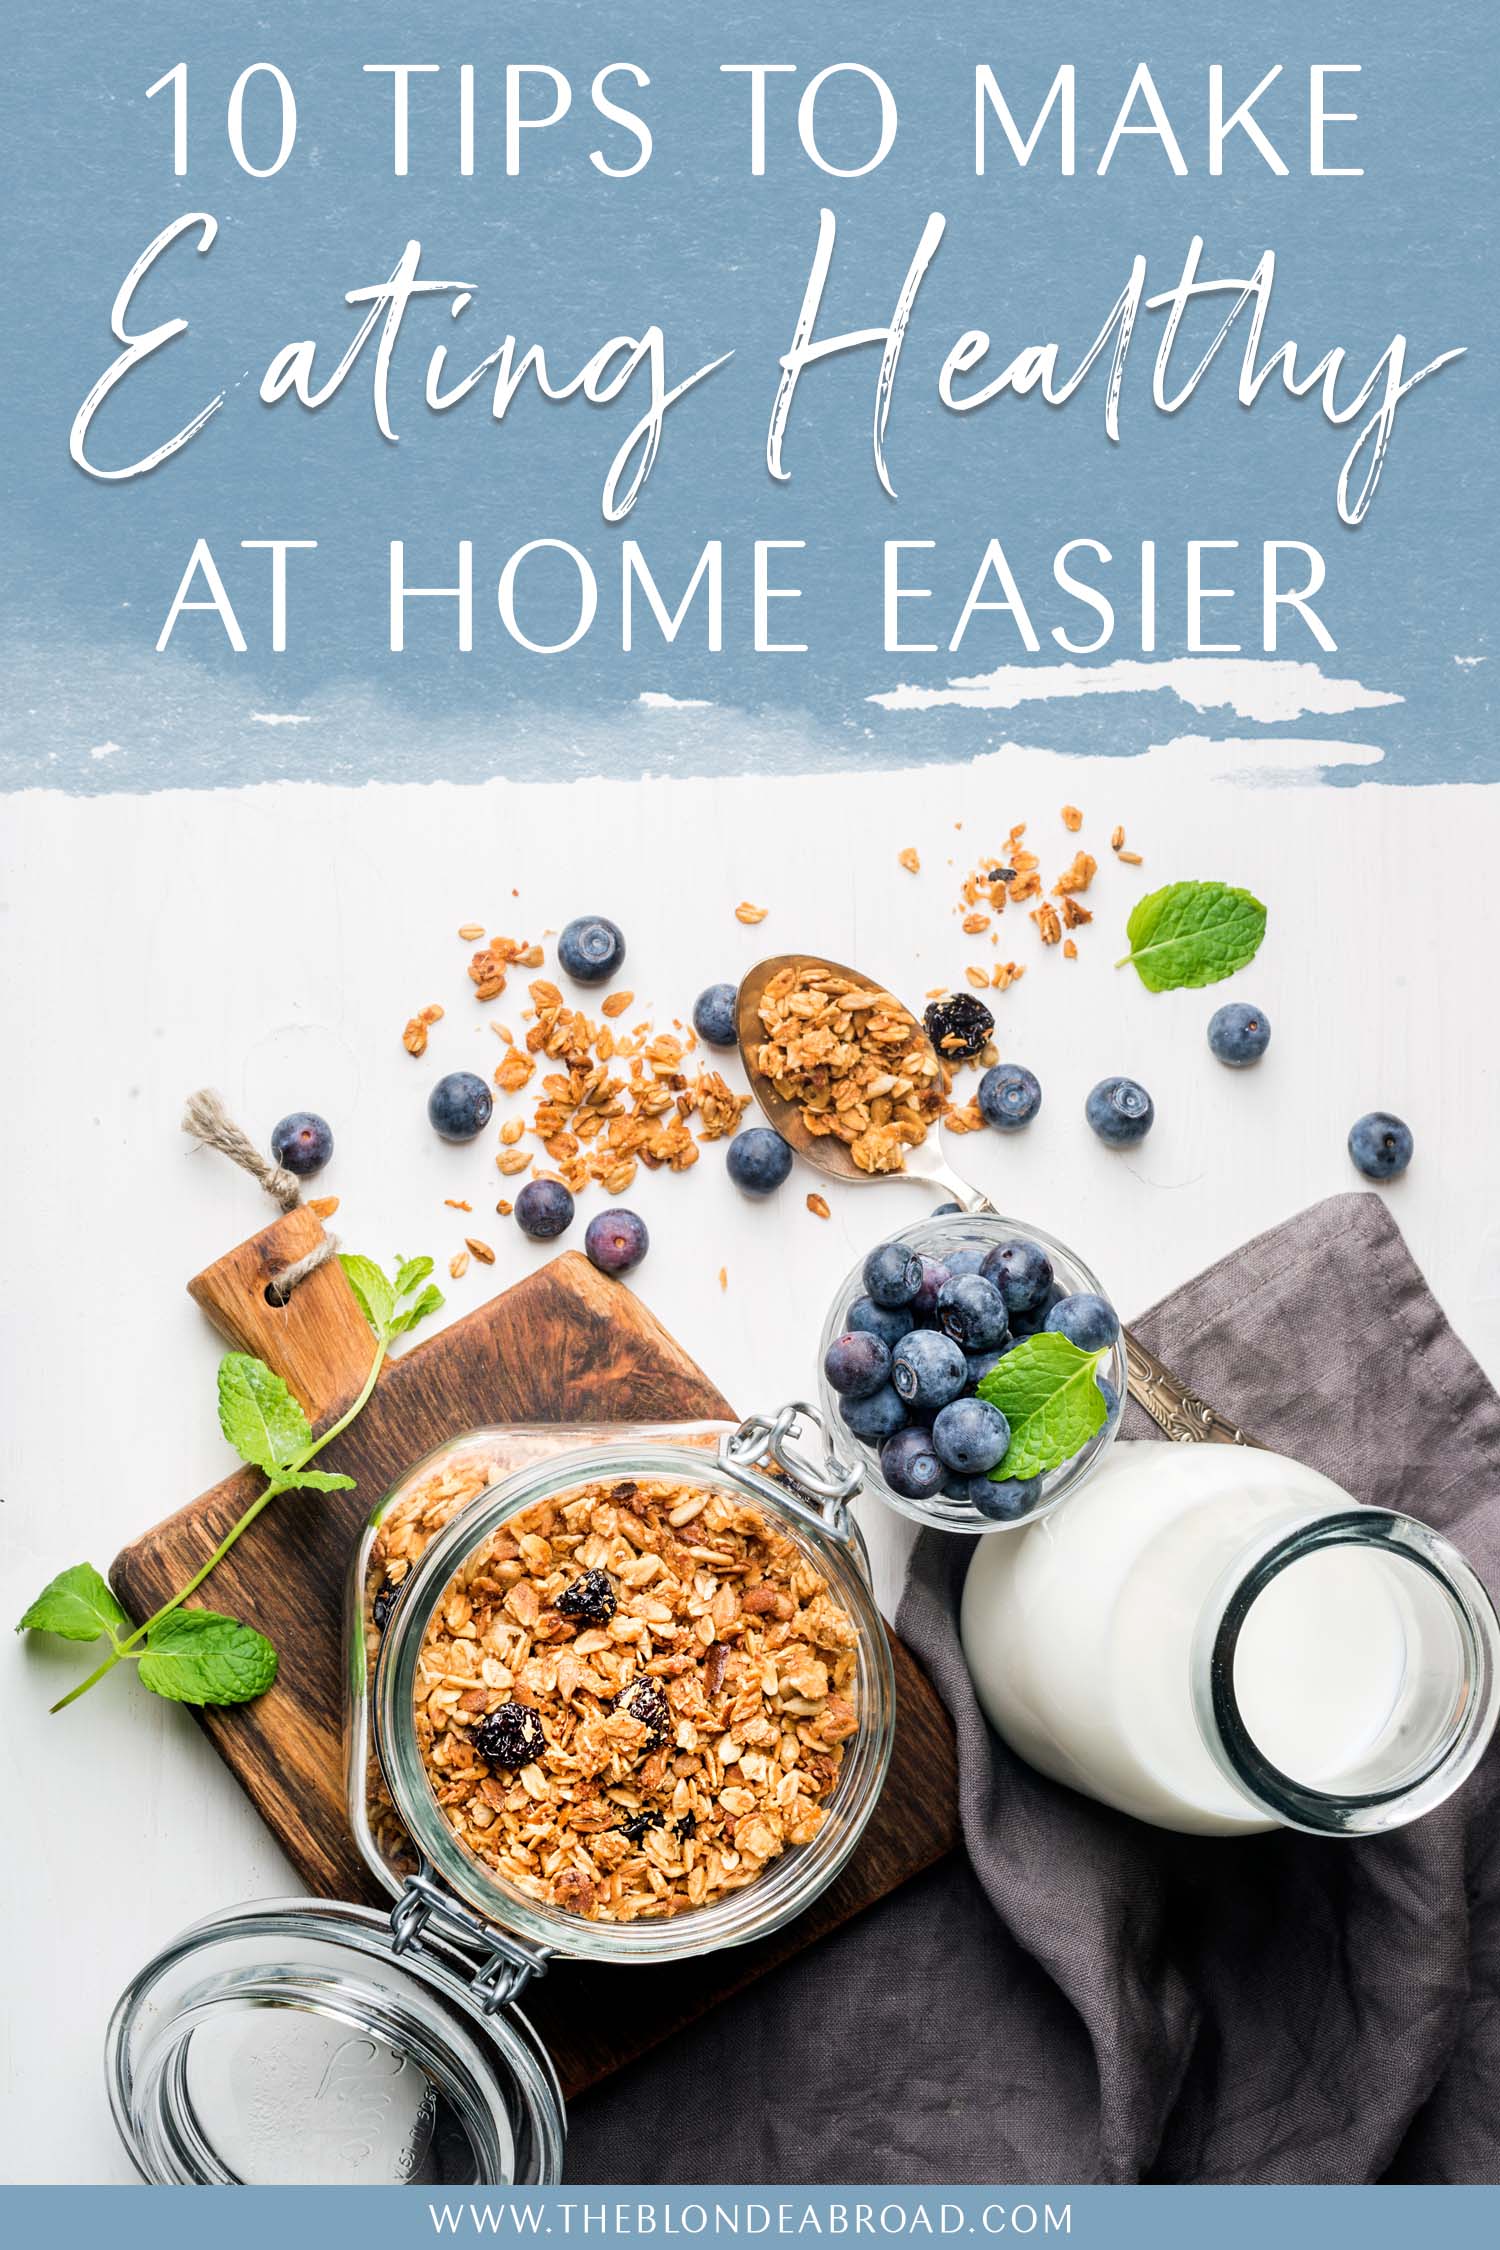 10 tips eating healthy at home easier